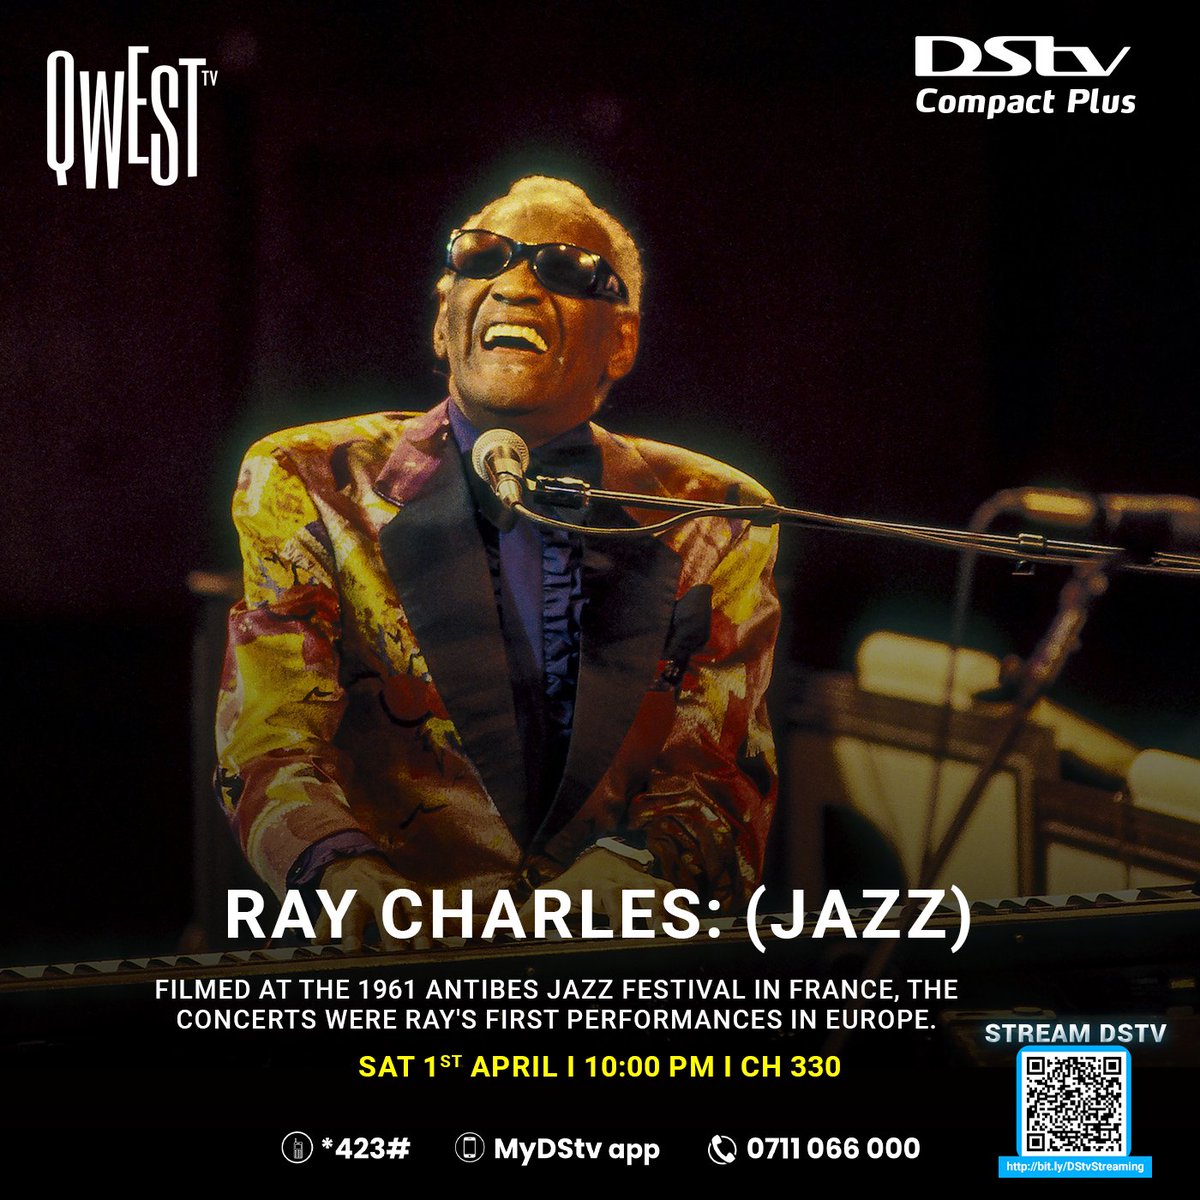 It's 1961 and Ray Charles delivers the frenzy of gospel supported by the Raelets and an excellent formation.

Ray Charles: (Jazz) | 10 pm | Qwest TV Ch. 330

Download #MyDStv App or Dial ✳423# to buy, pay, reconnect, or clear error codes.
#DoSometv #WhereMusicLives